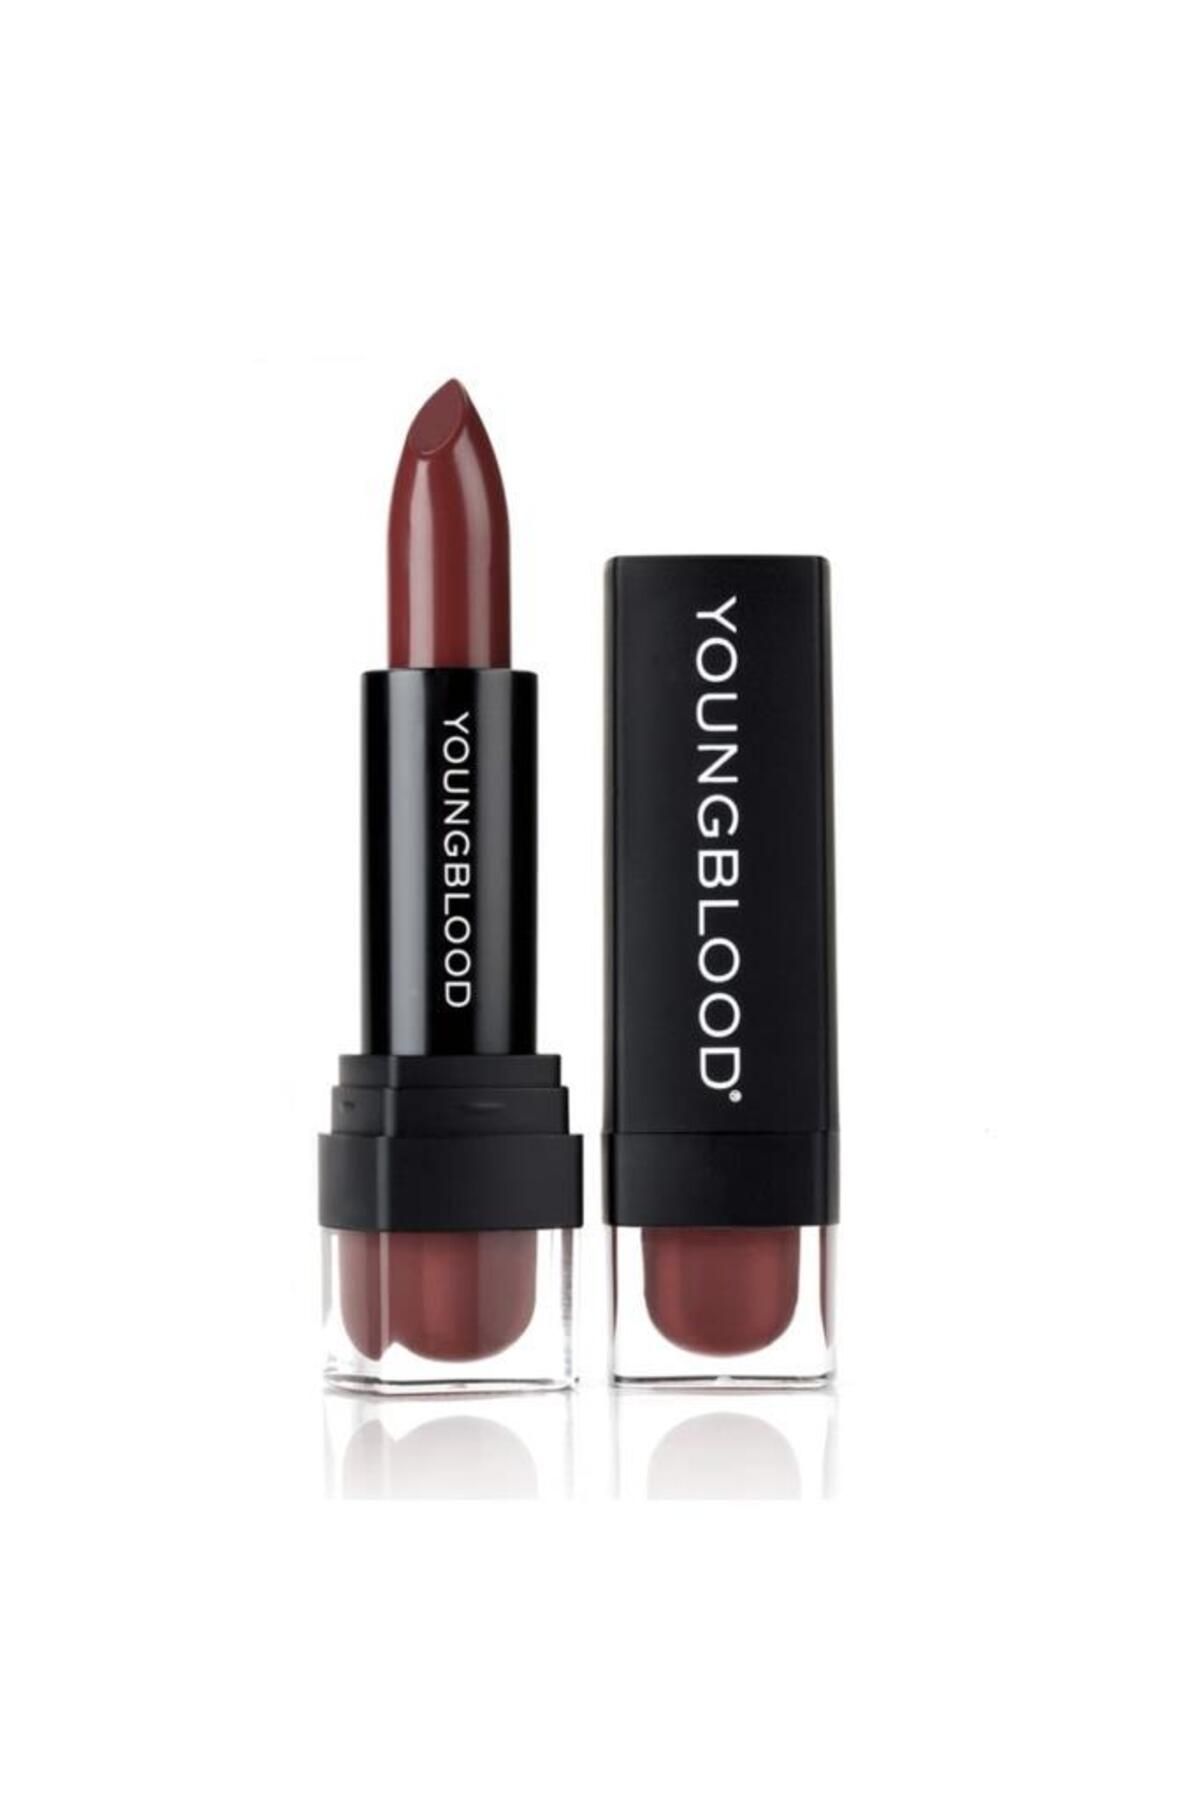 Youngblood Youngblood Lipstick 4 gr - Vamp